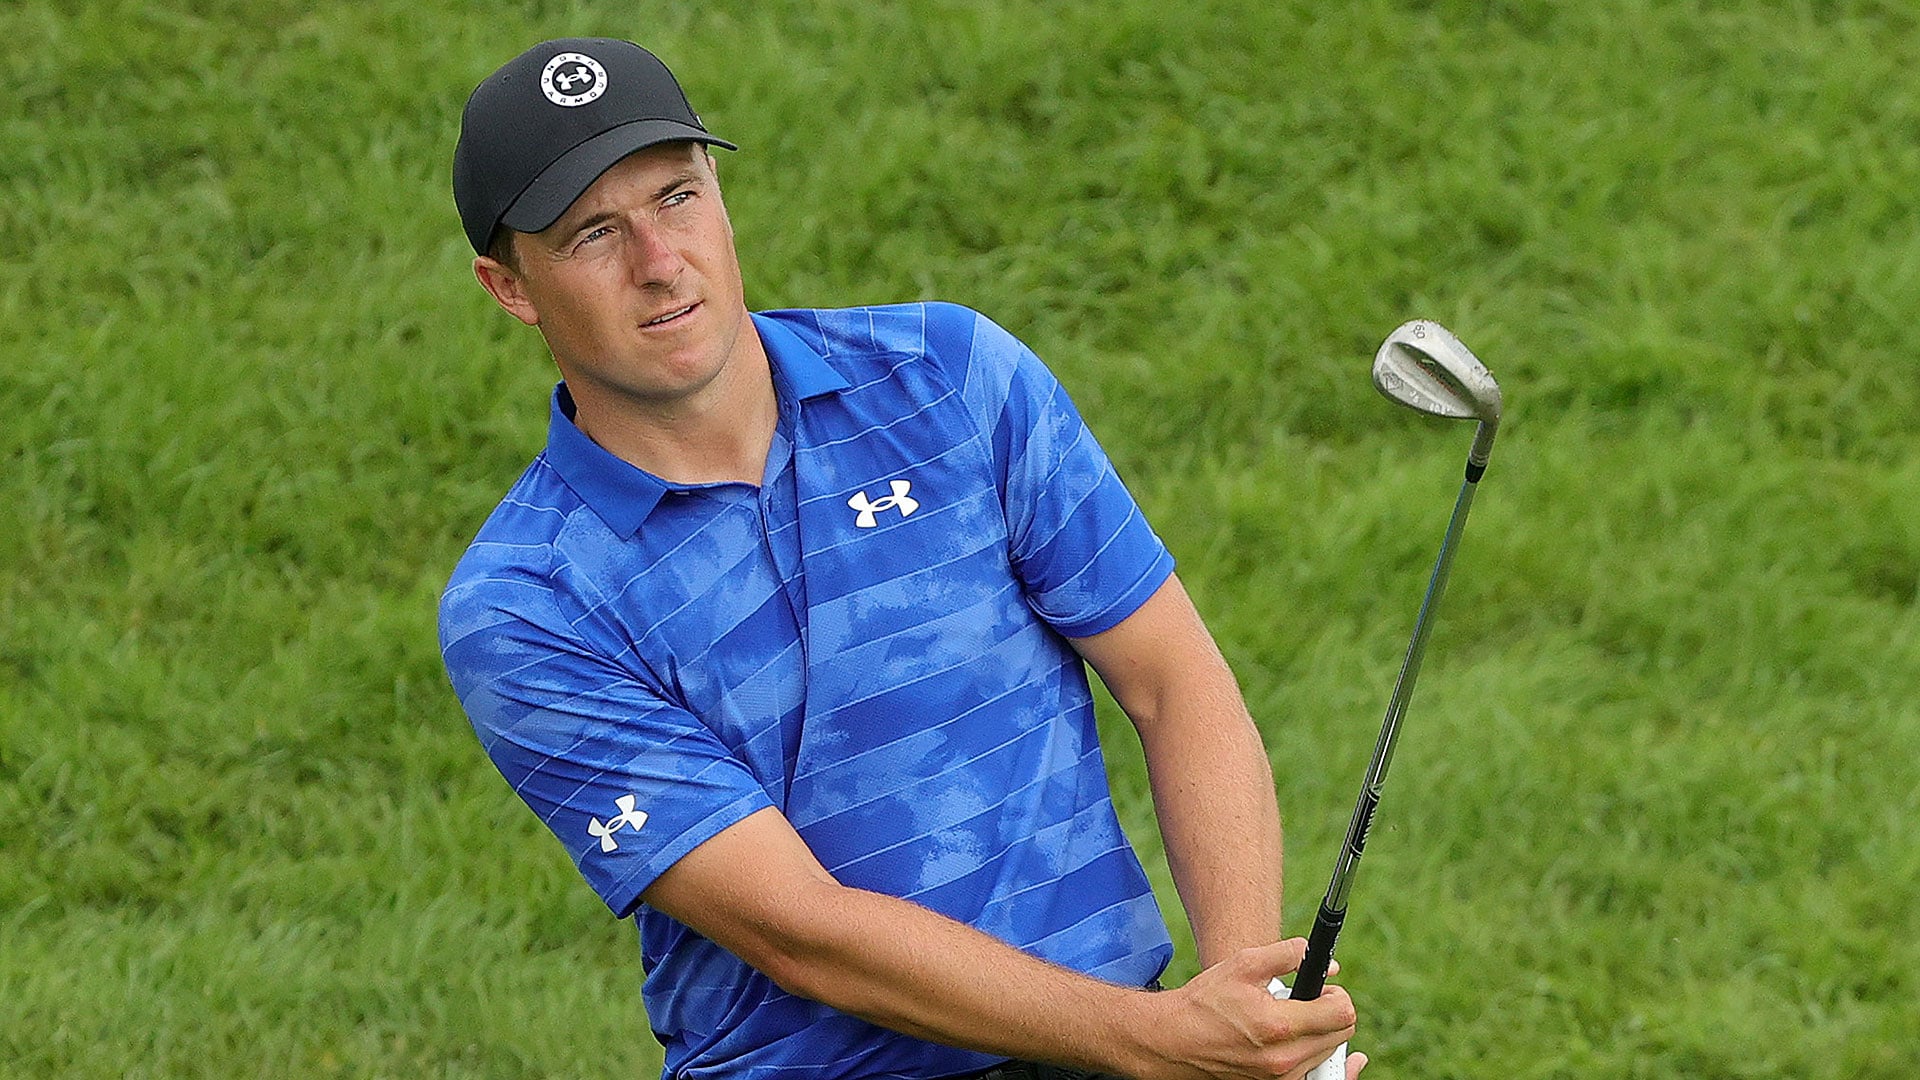 After three-year absence, Jordan Spieth back in world ranking top 10